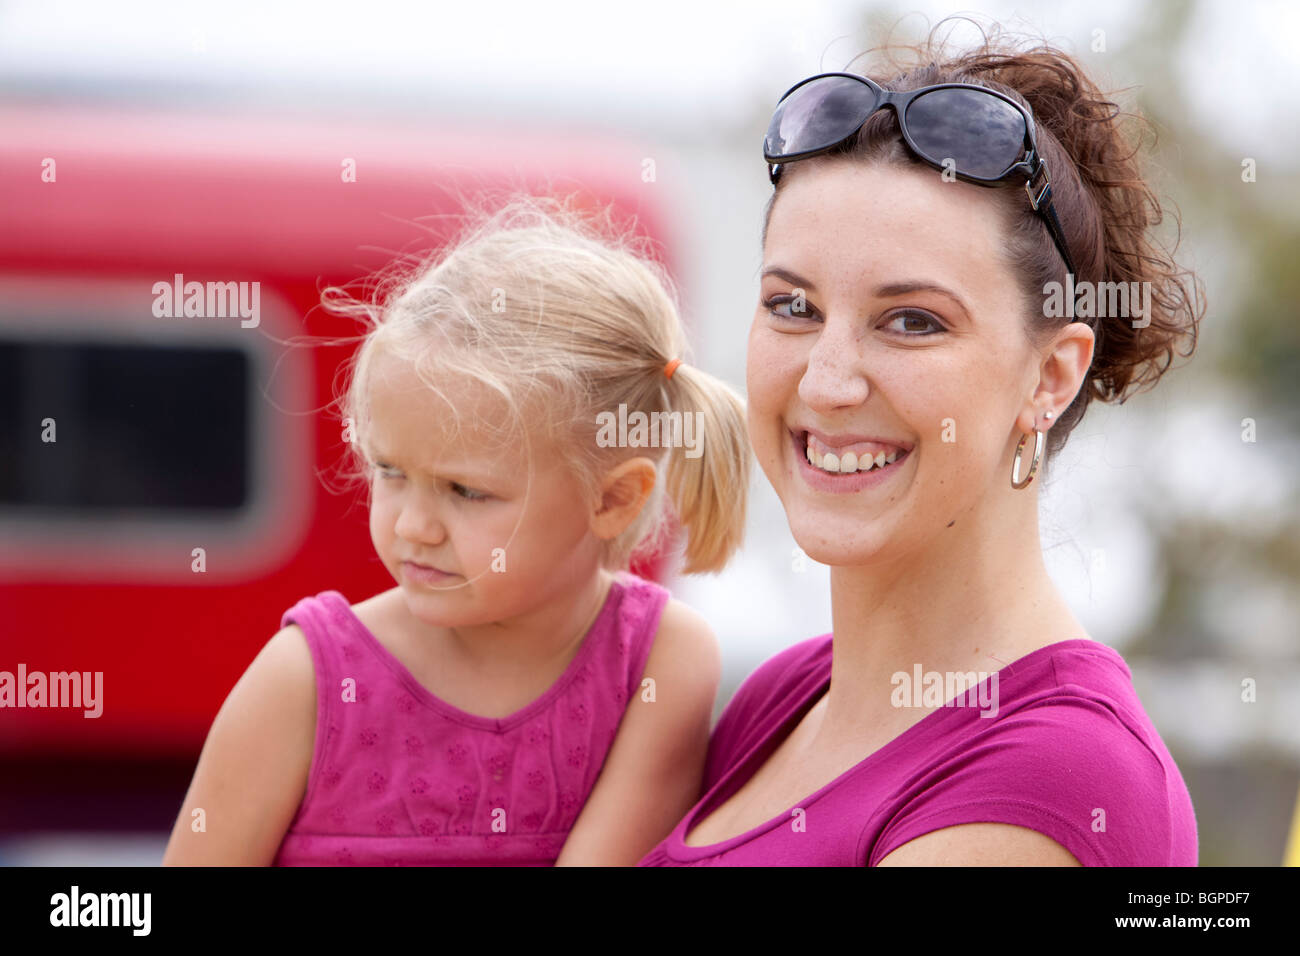 A woman and a child Stock Photo